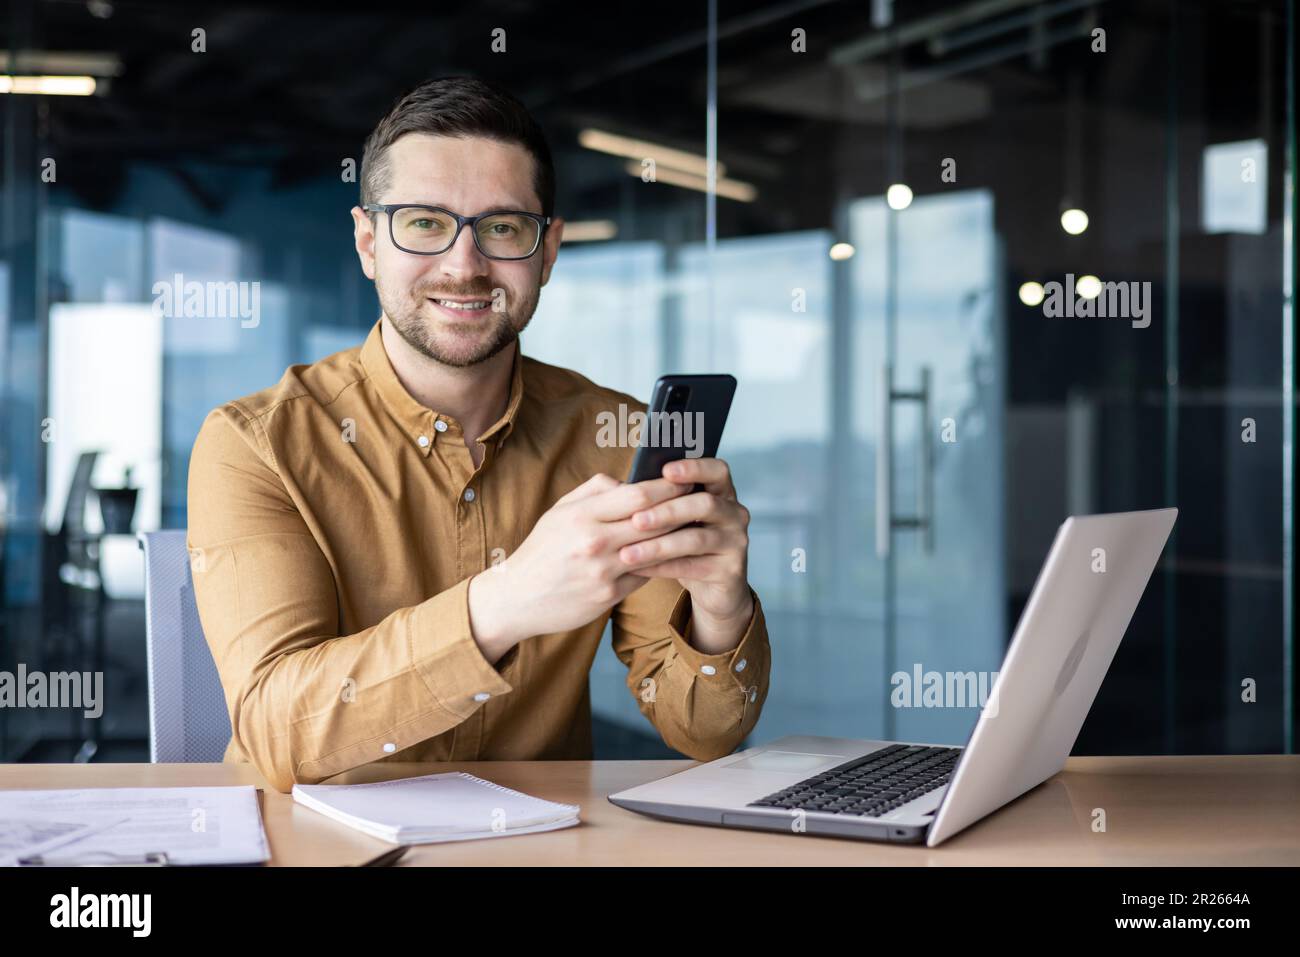 Portrait of a young businessman working in an office center, sitting at a desk and using a mobile phone. Smiling looking at the camera. Stock Photo